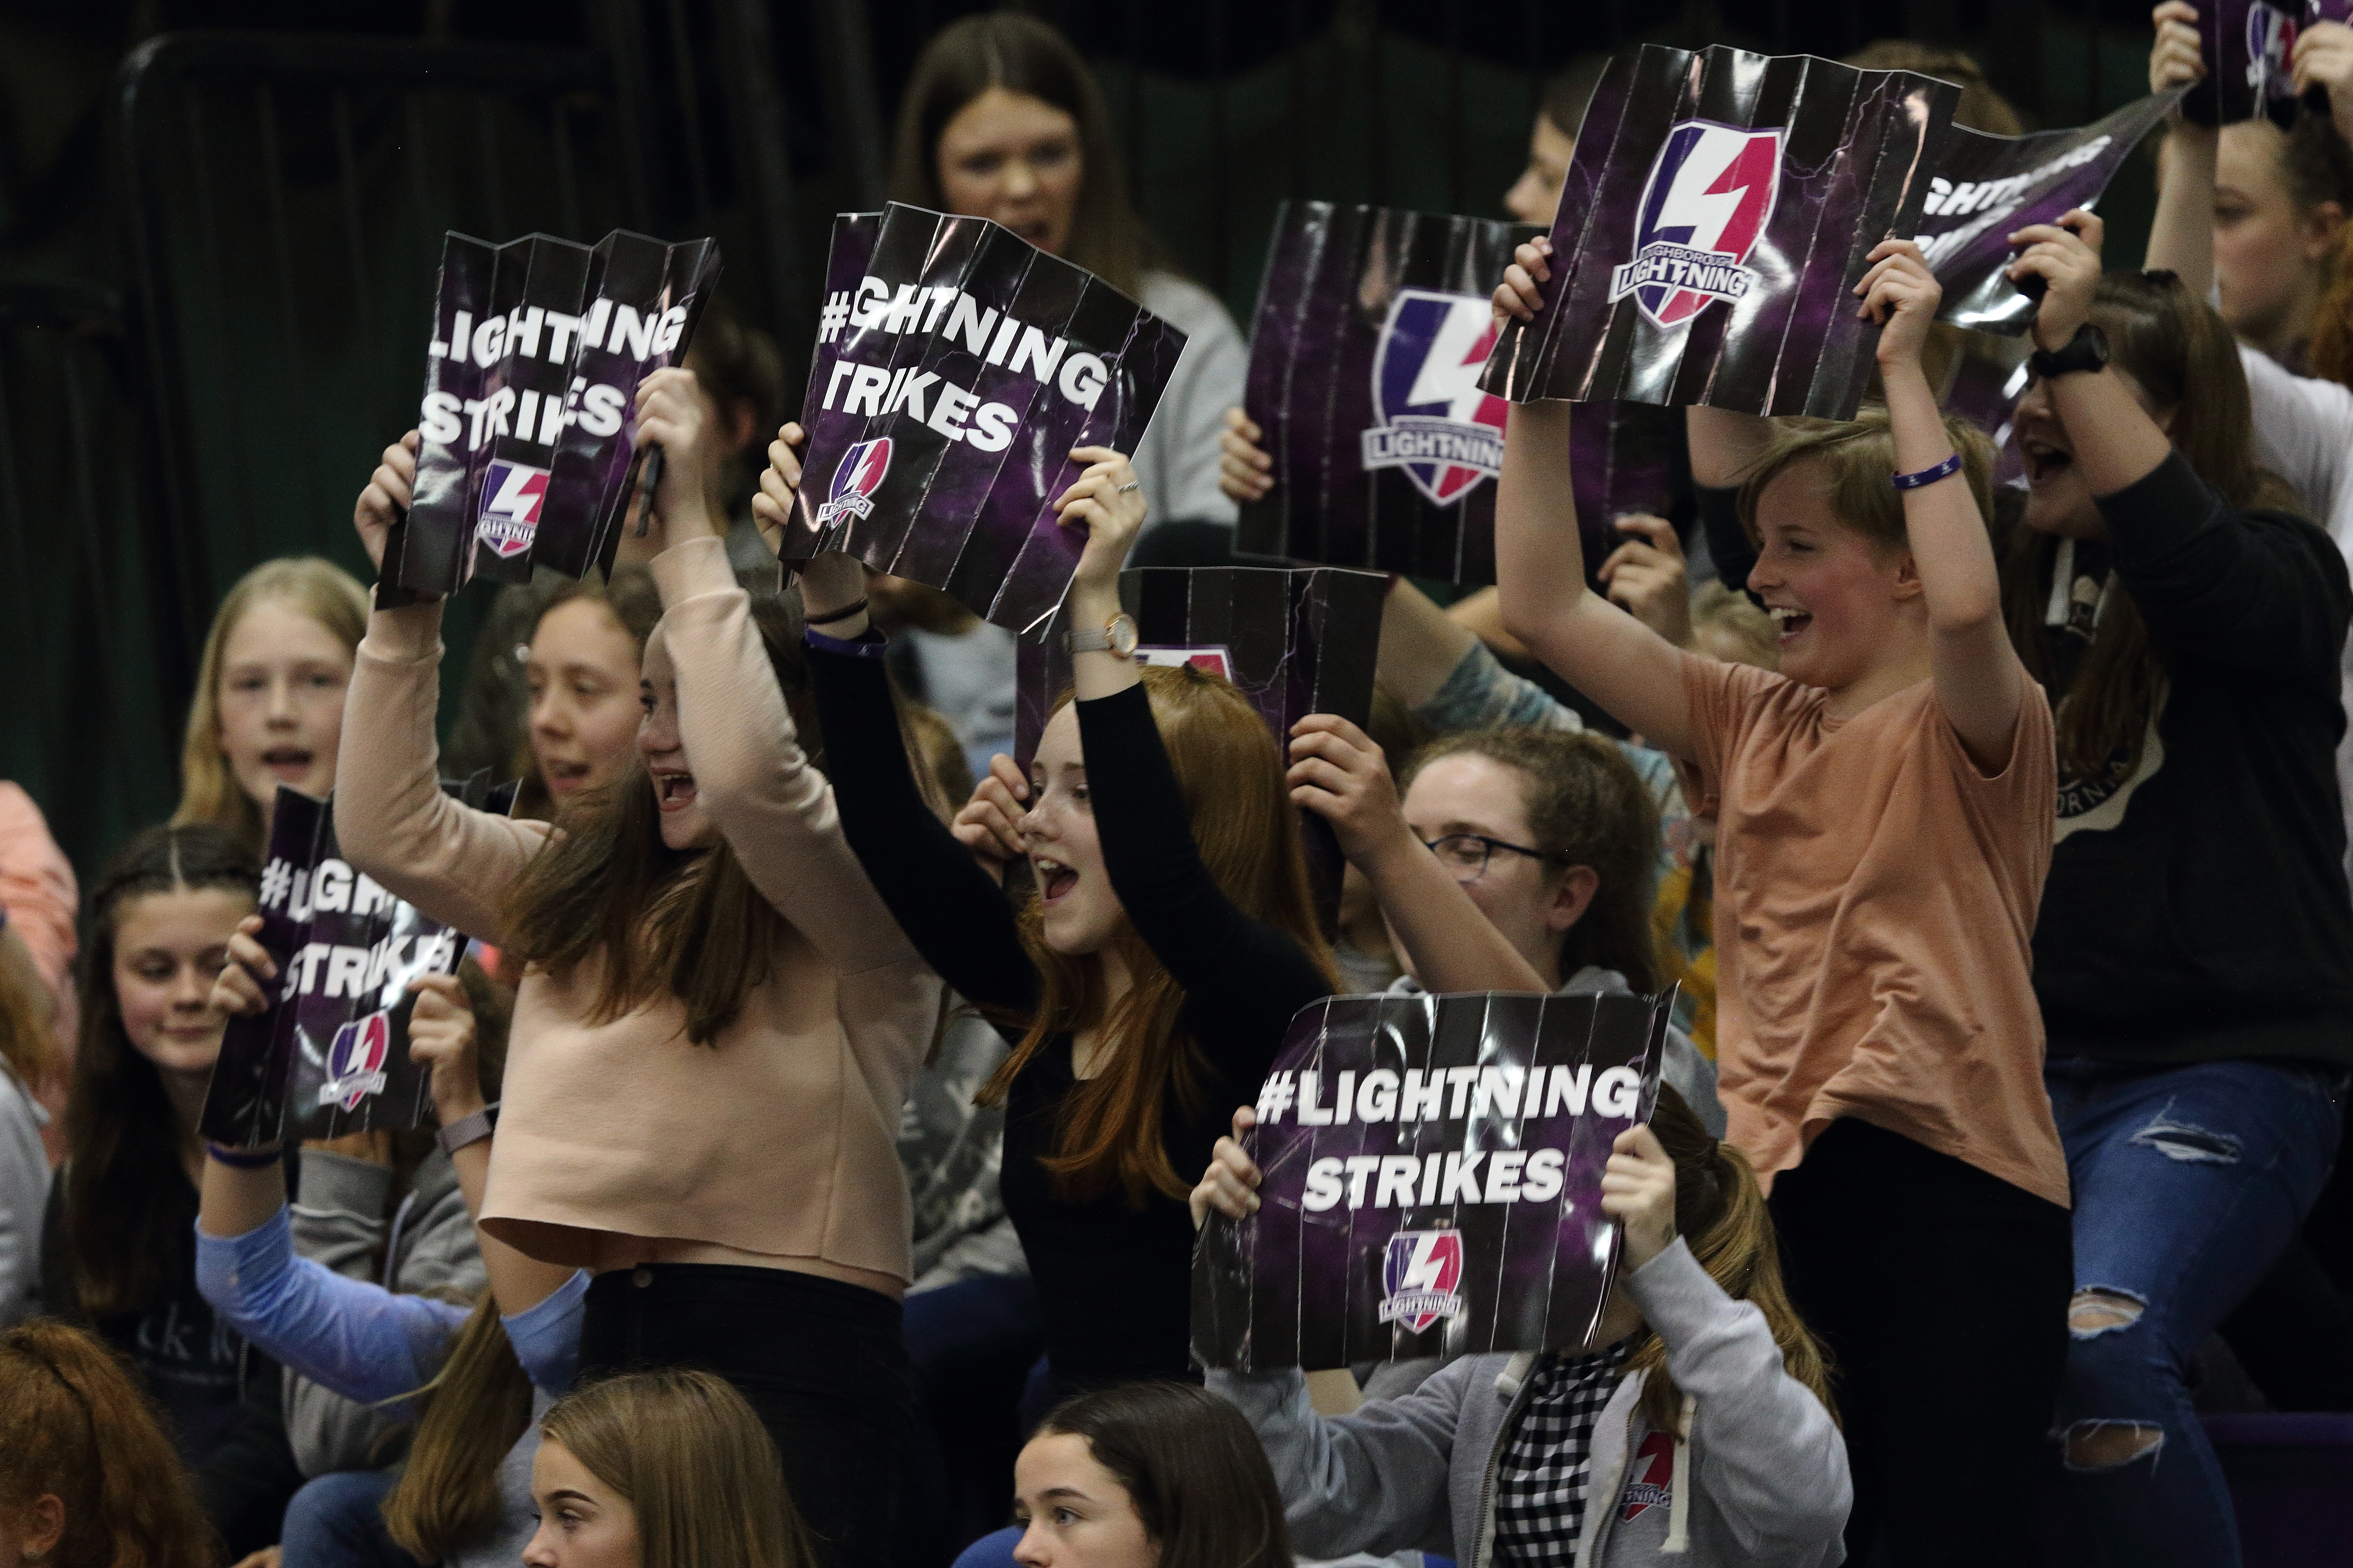 fans holding up signs with text 'Lightning strikes'